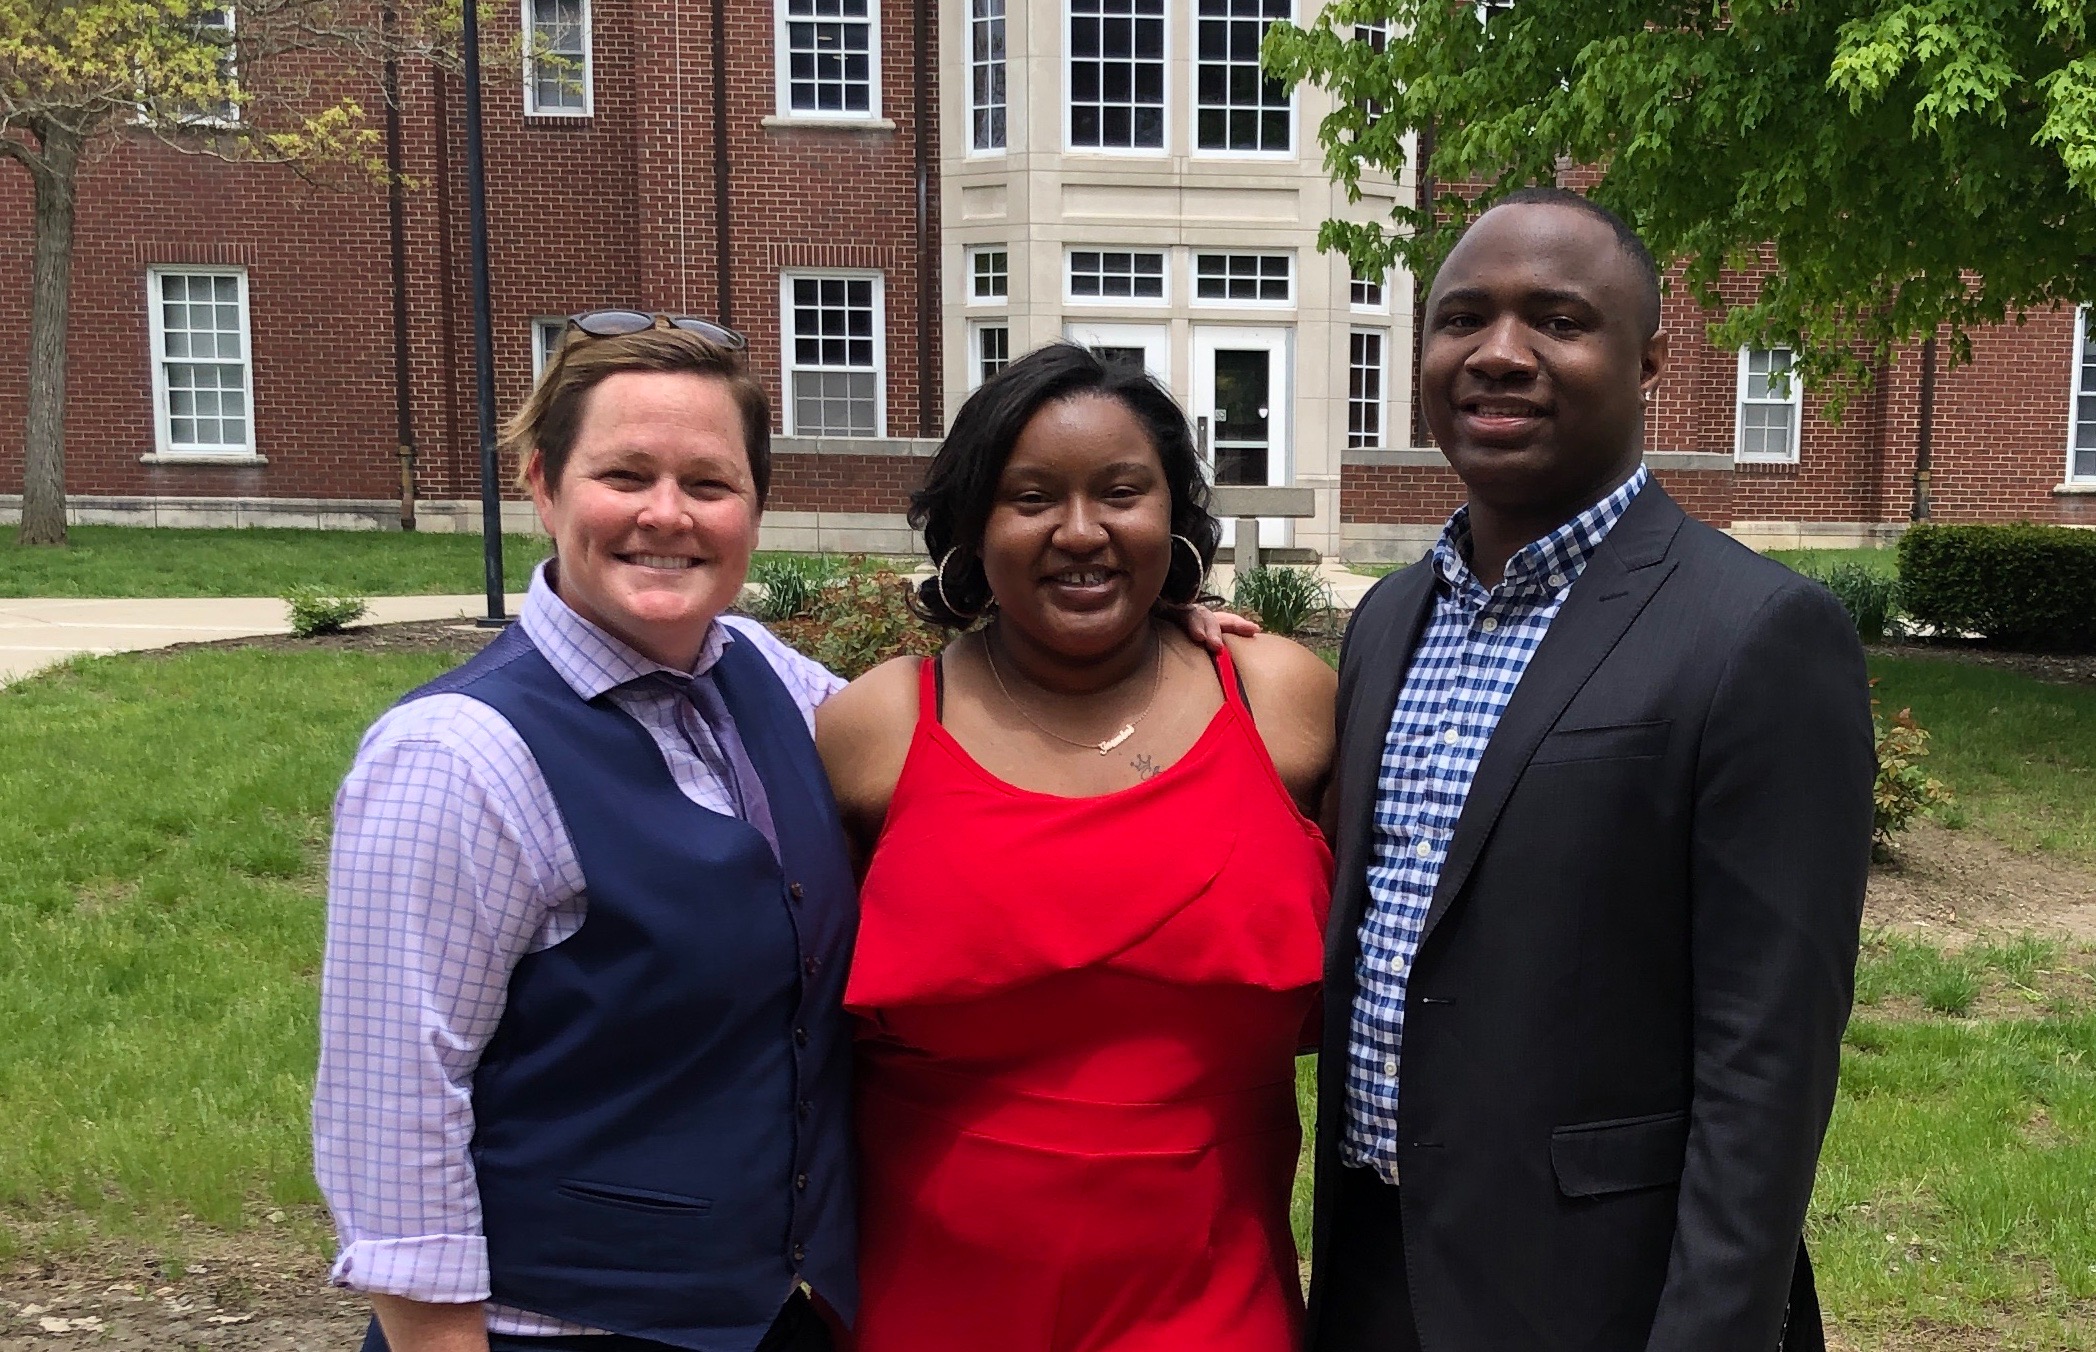  - Dr. Korrin Saunders, alum,&nbsp; began mentoring Jasmine &amp; Parrish at the Sue Duncan Children&#39;s Center in 2009. She continued in this role for the last ten years and celebrated Jasmine&#39;s recent Graduation from Earlham College.&nbsp; #Mentoring matters!